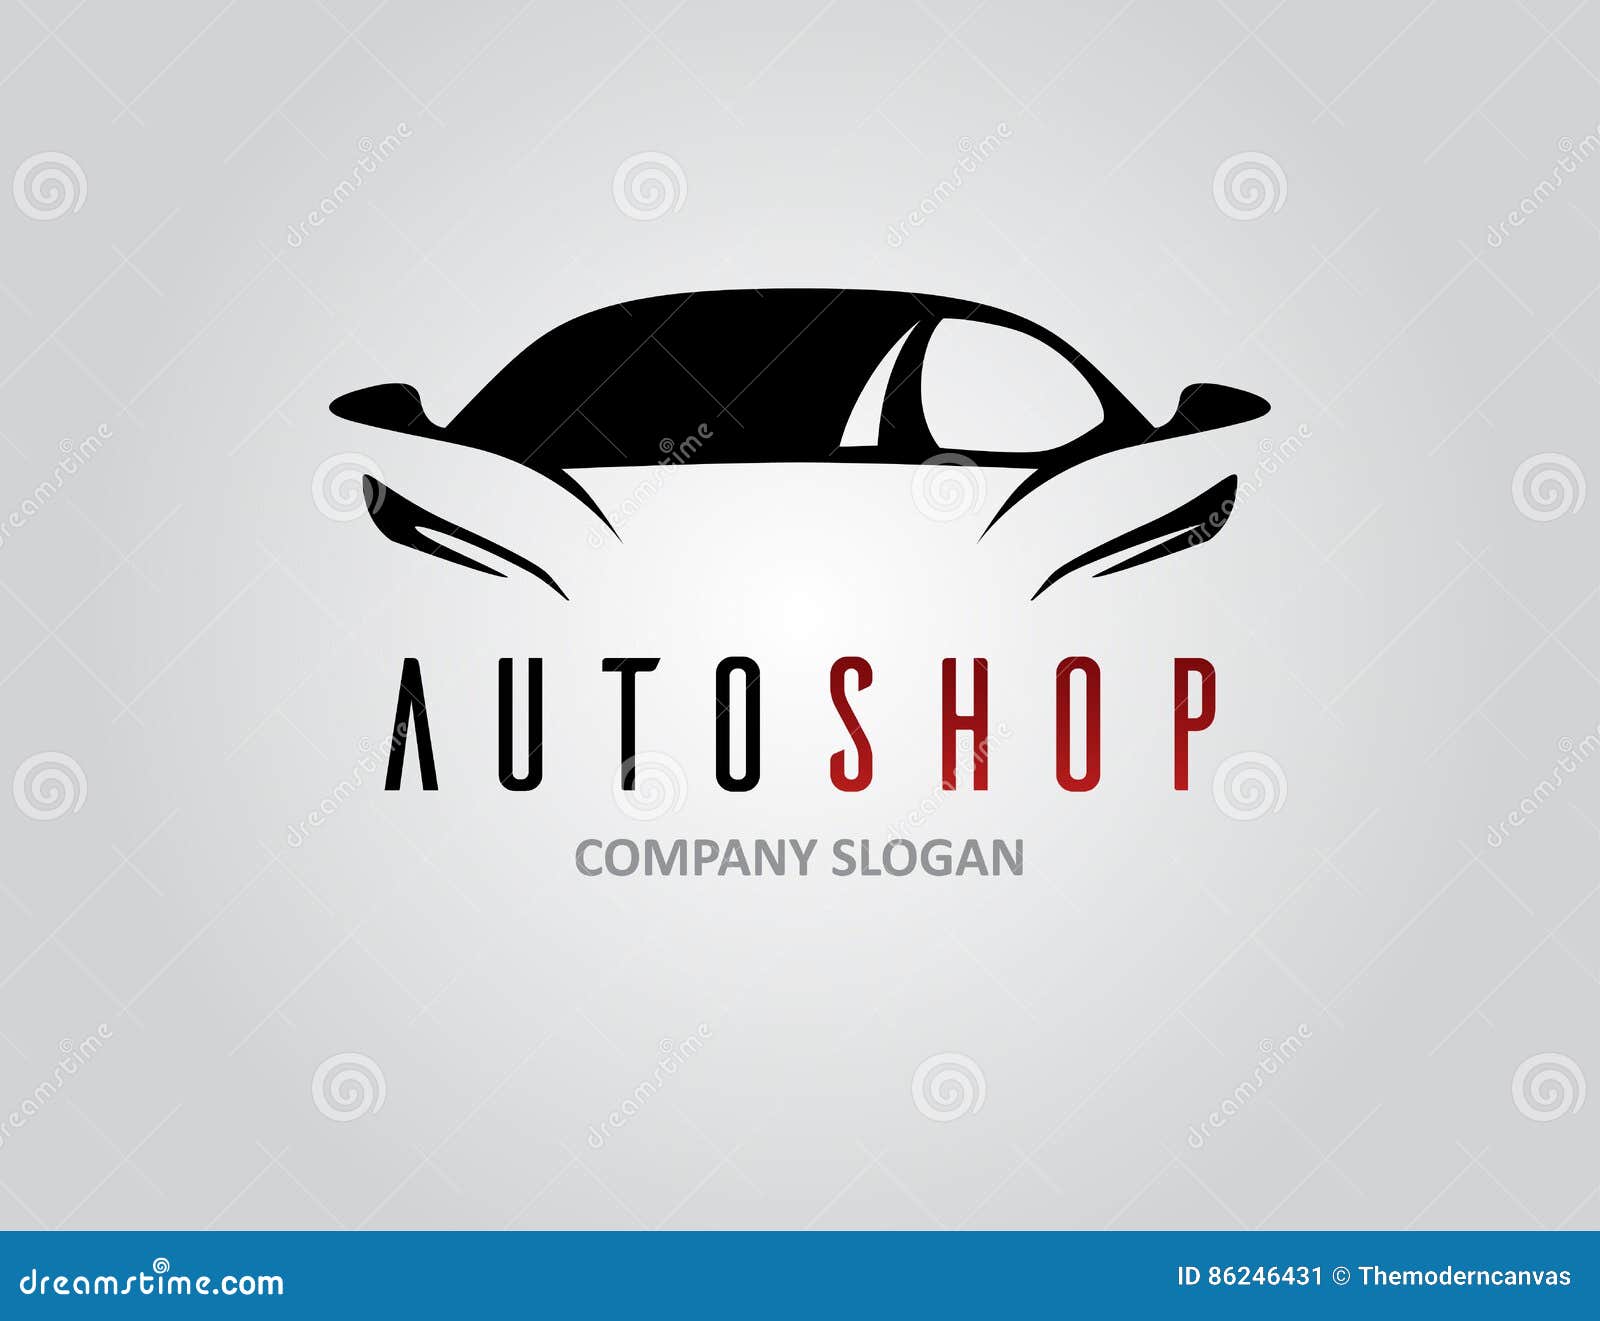 auto shop car logo  with concept sports vehicle silhouette